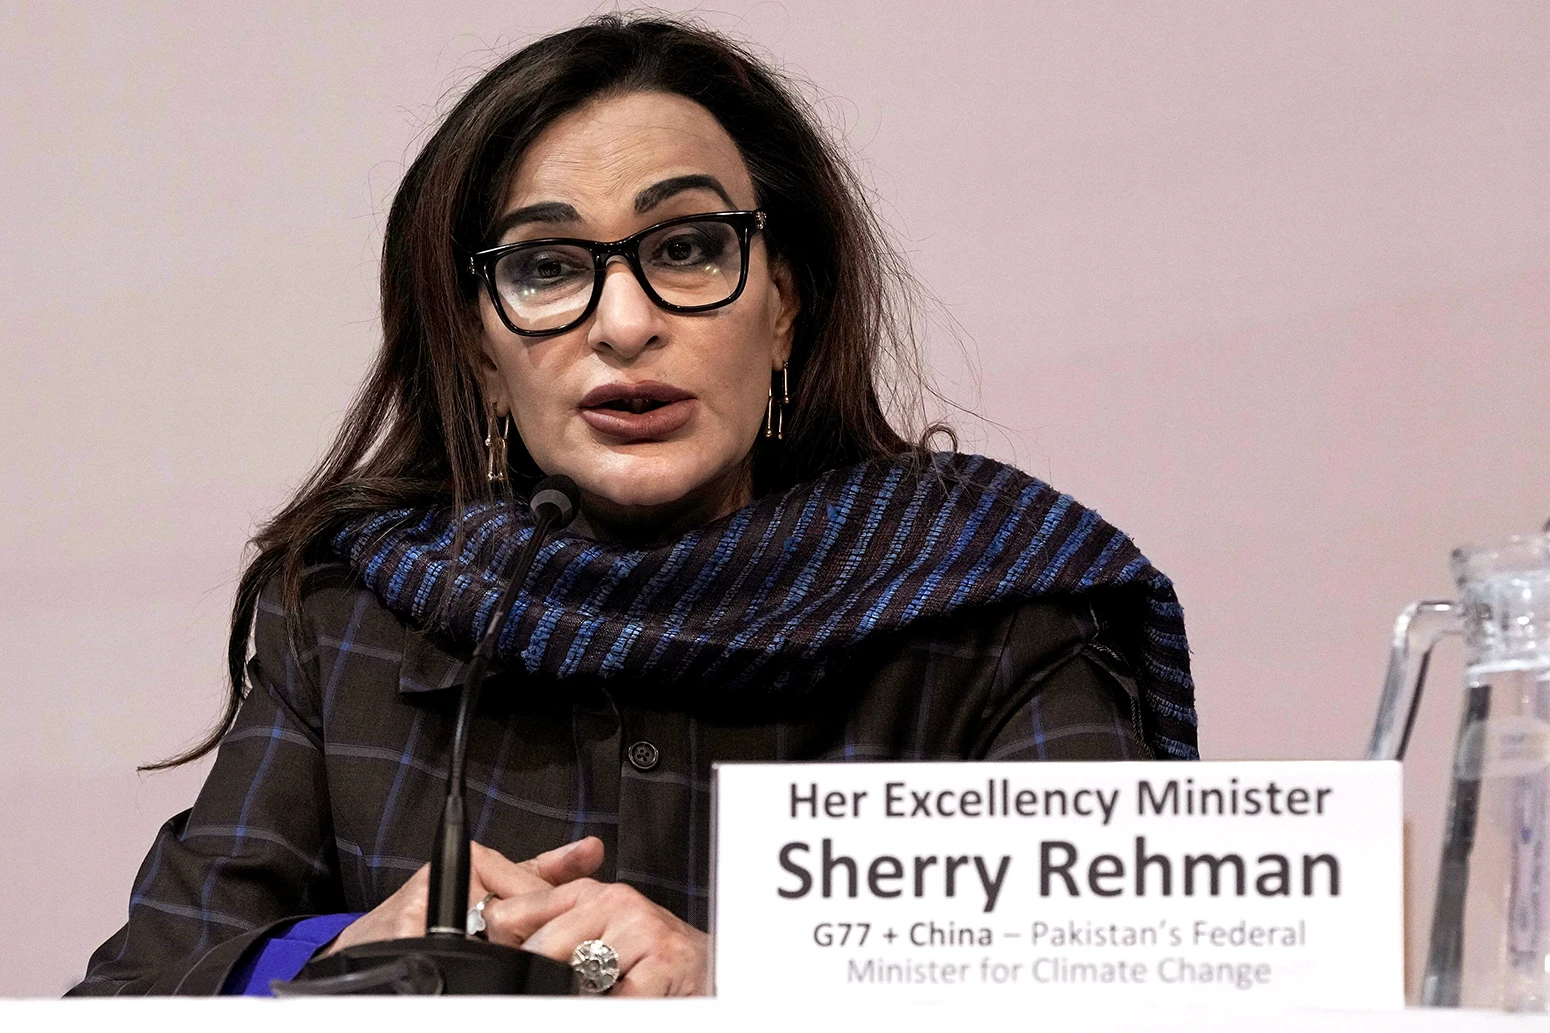 Sherry Rehman, minister of climate change for Pakistan, at COP27 on 17 November 2022.